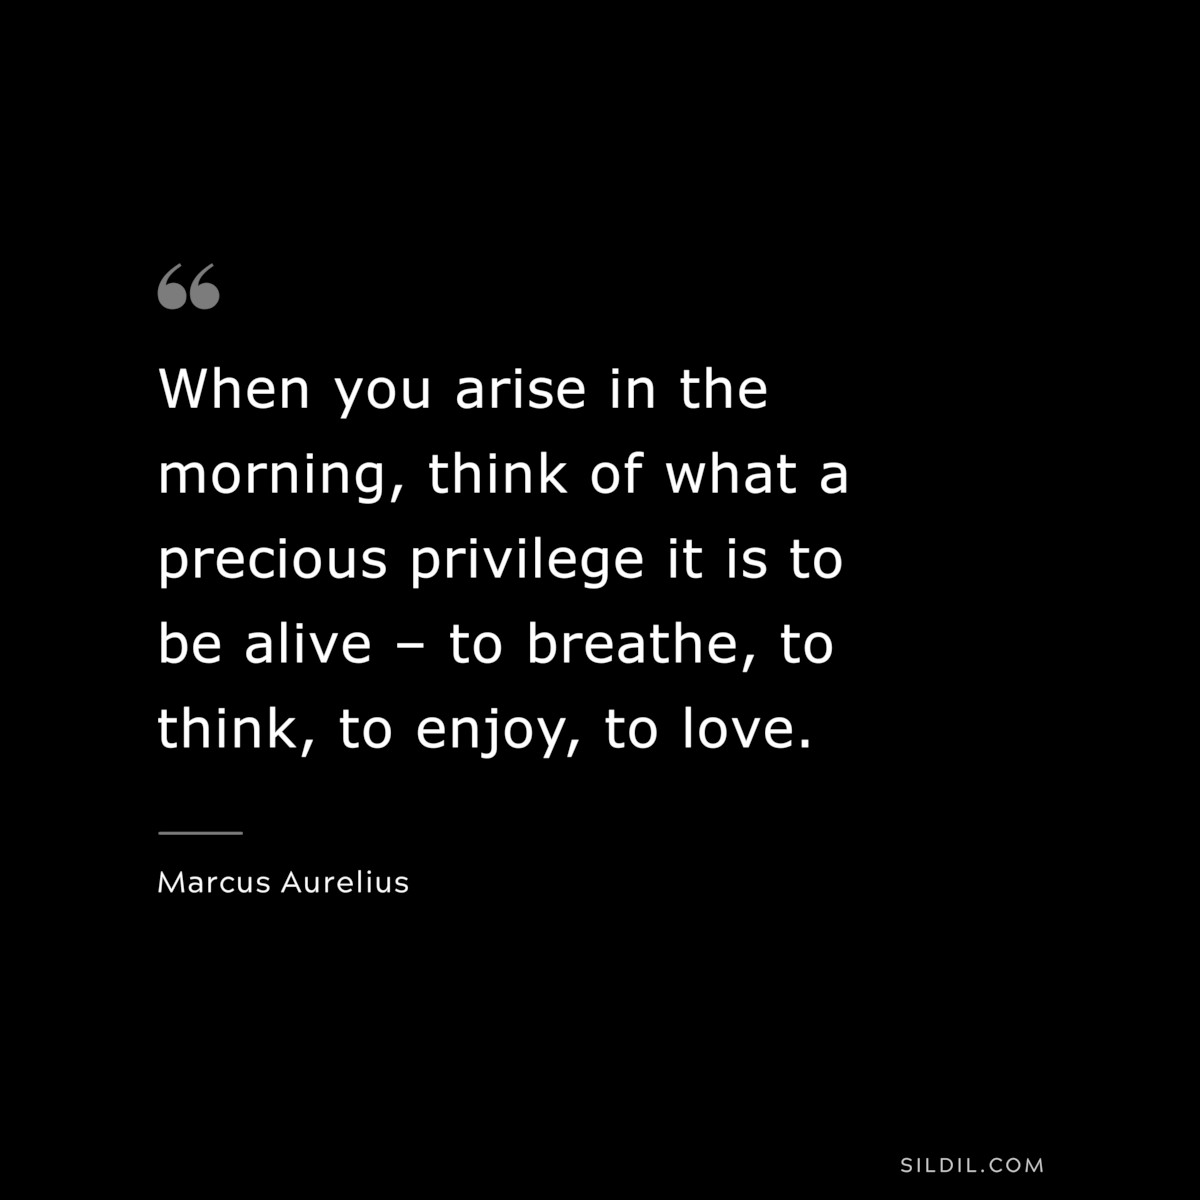 When you arise in the morning, think of what a precious privilege it is to be alive – to breathe, to think, to enjoy, to love. ― Marcus Aurelius